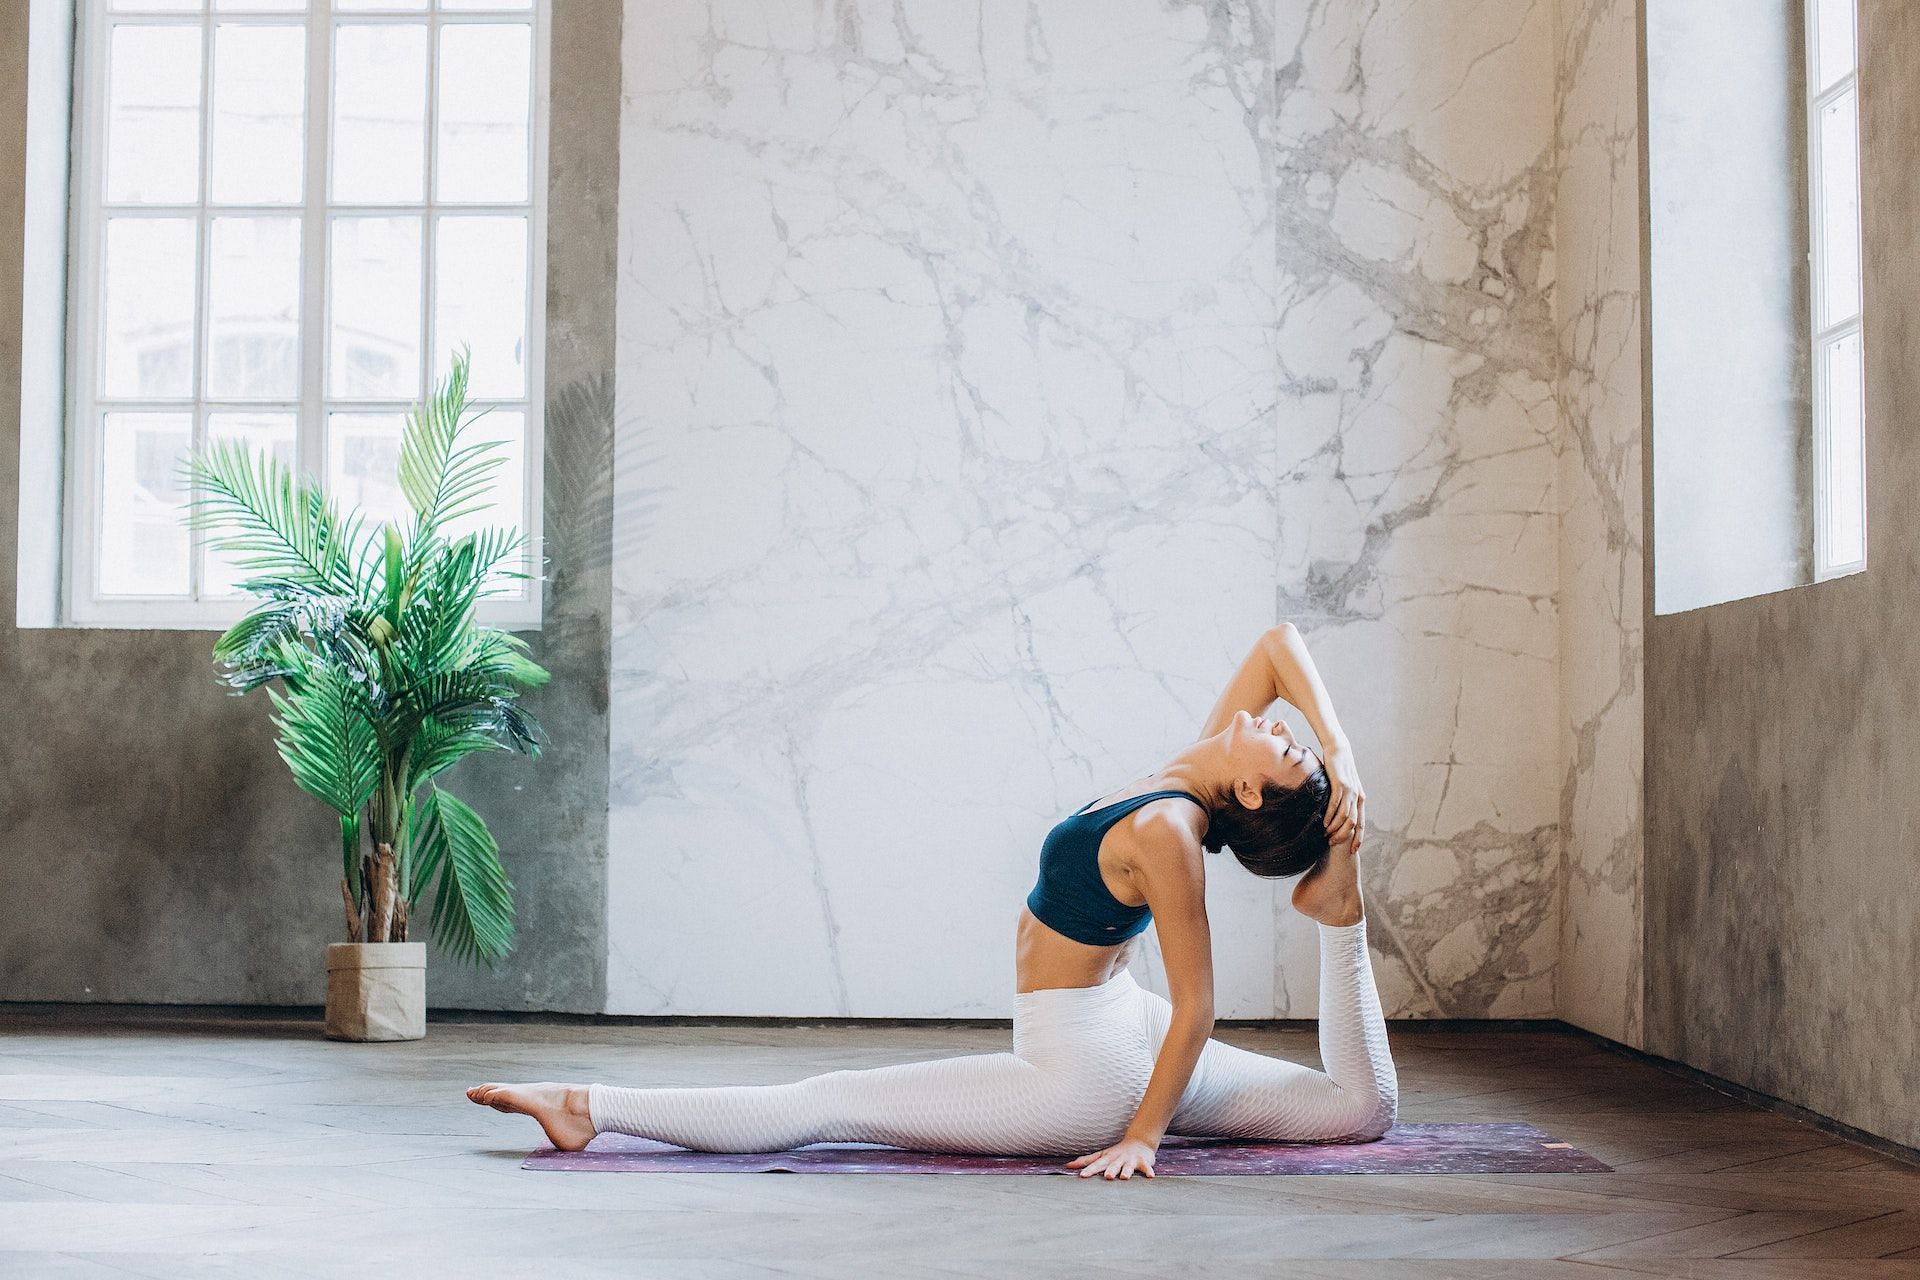 Chest opening yoga poses are effective for the entire body. (Photo by Elina Fairytale via pexels)